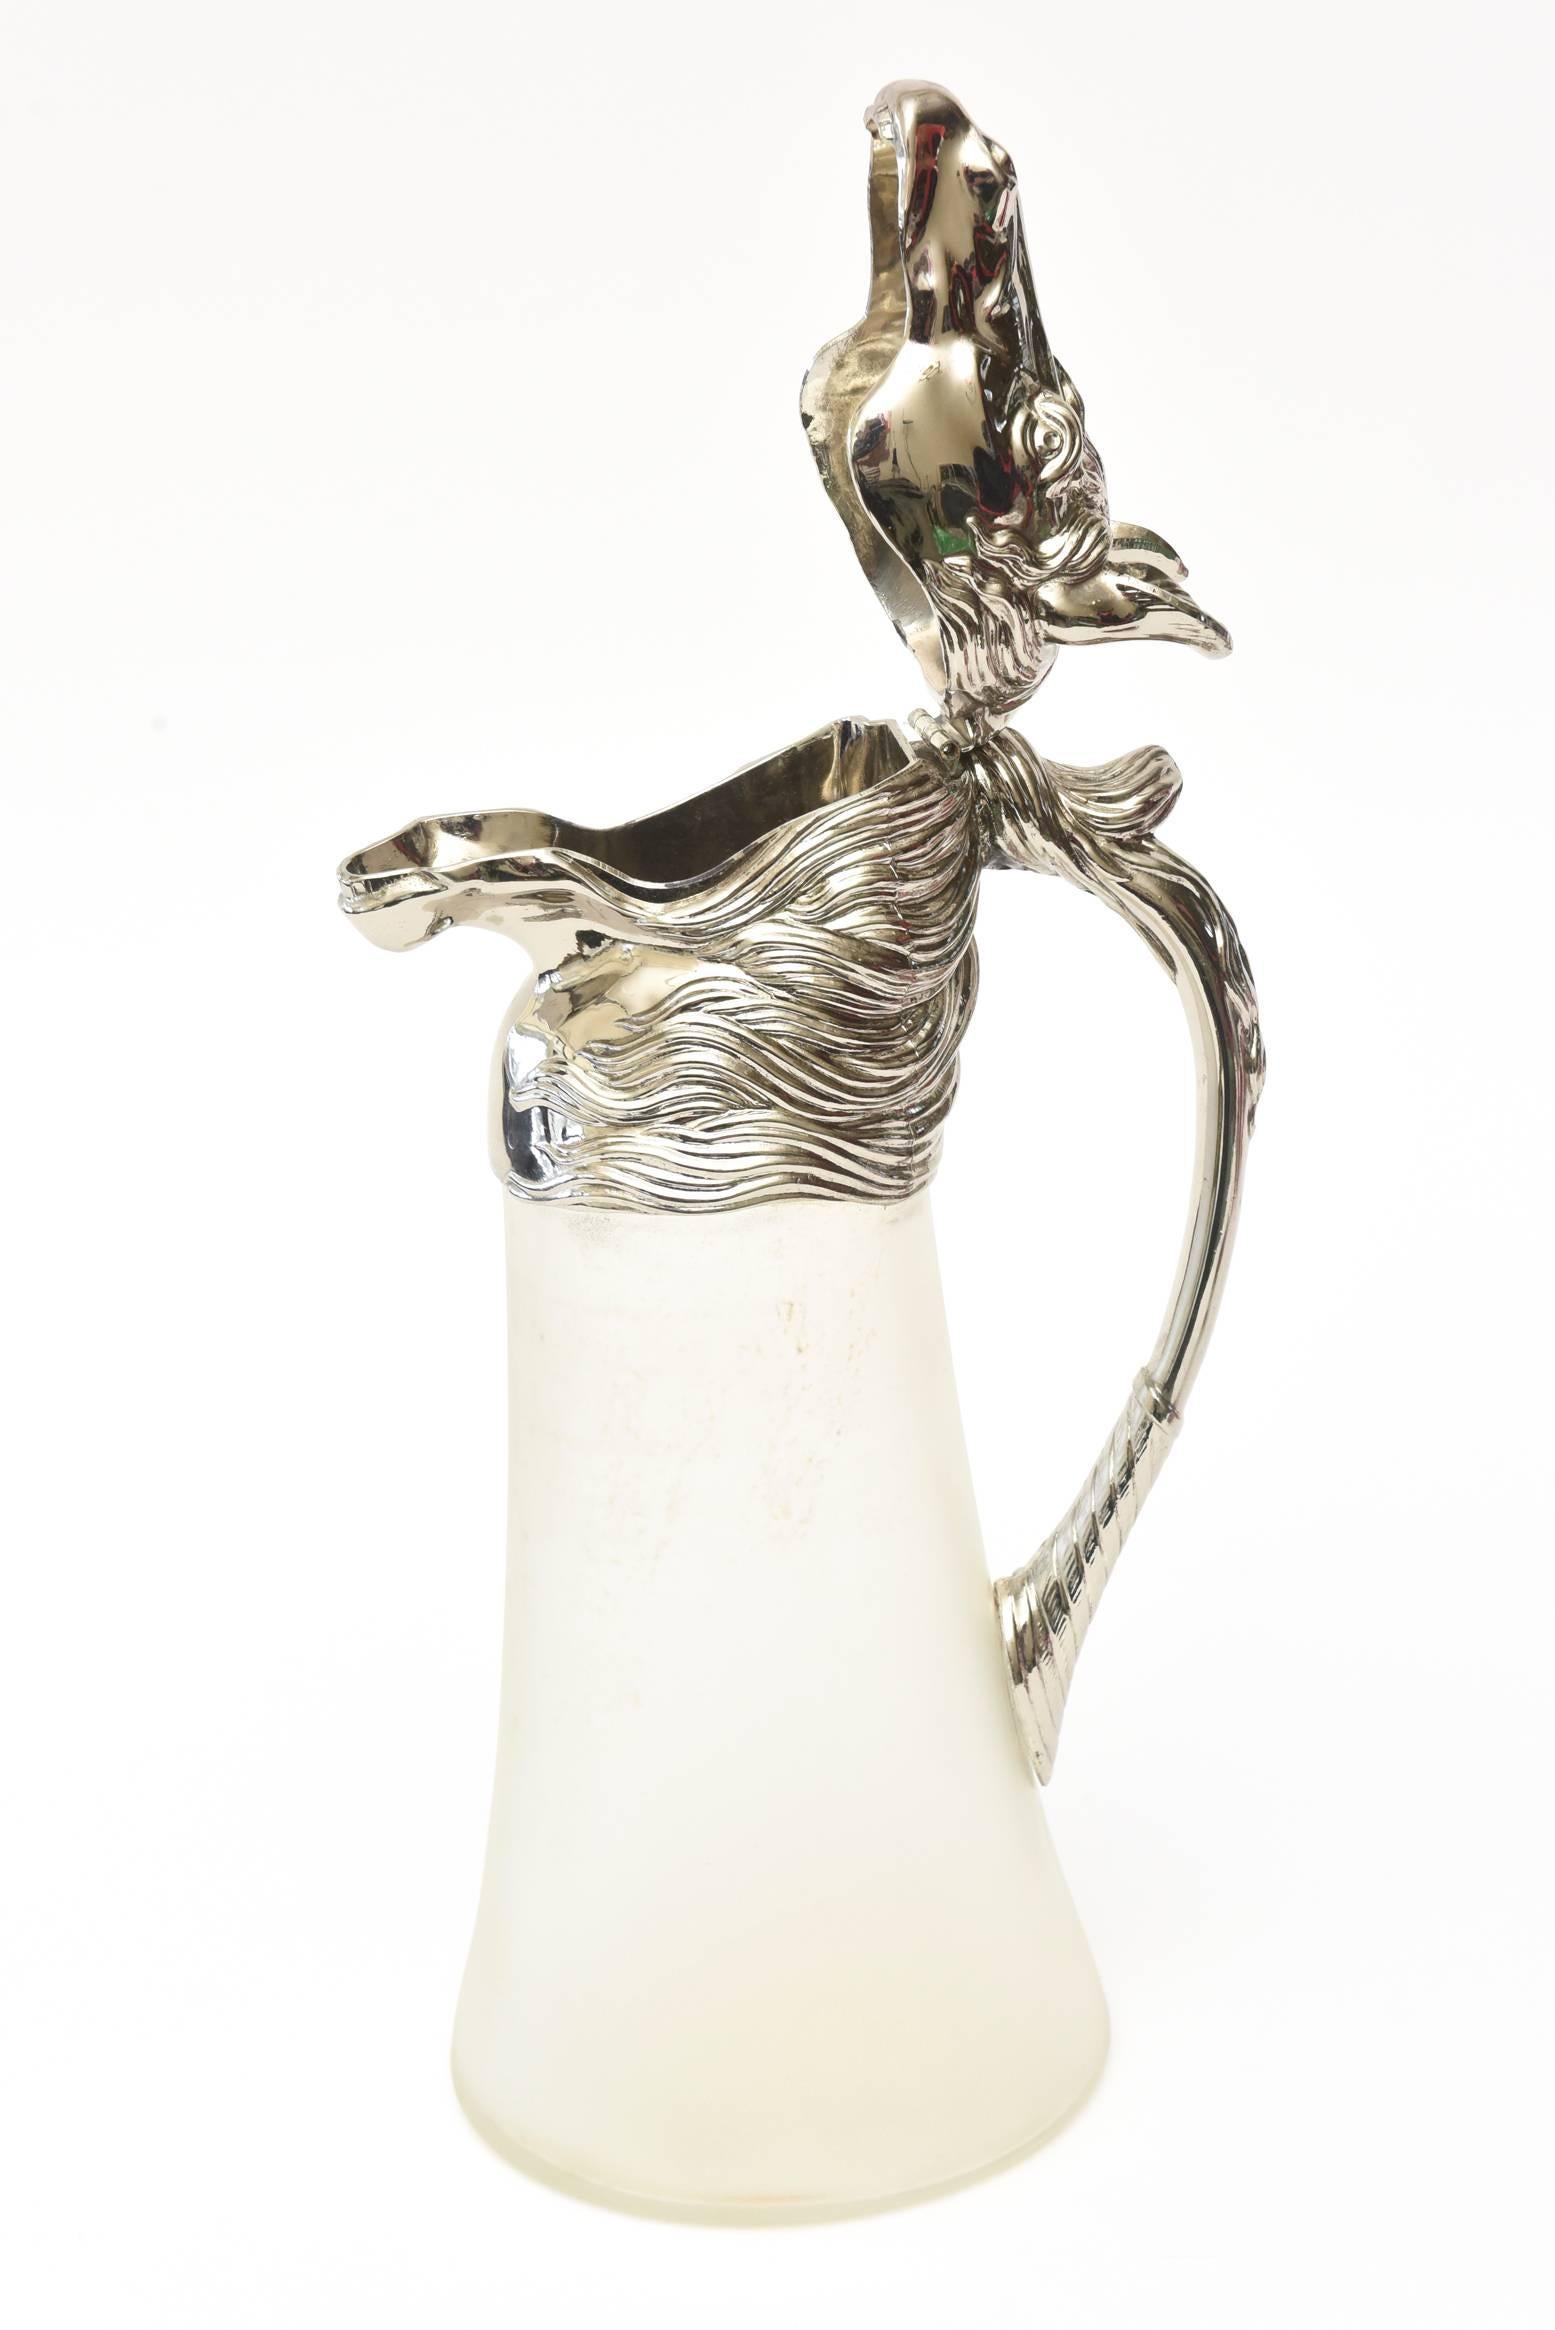 Nickel-Plated and Frosted Glass Horse Decanter Pitcher Barware Vintage In Good Condition For Sale In North Miami, FL